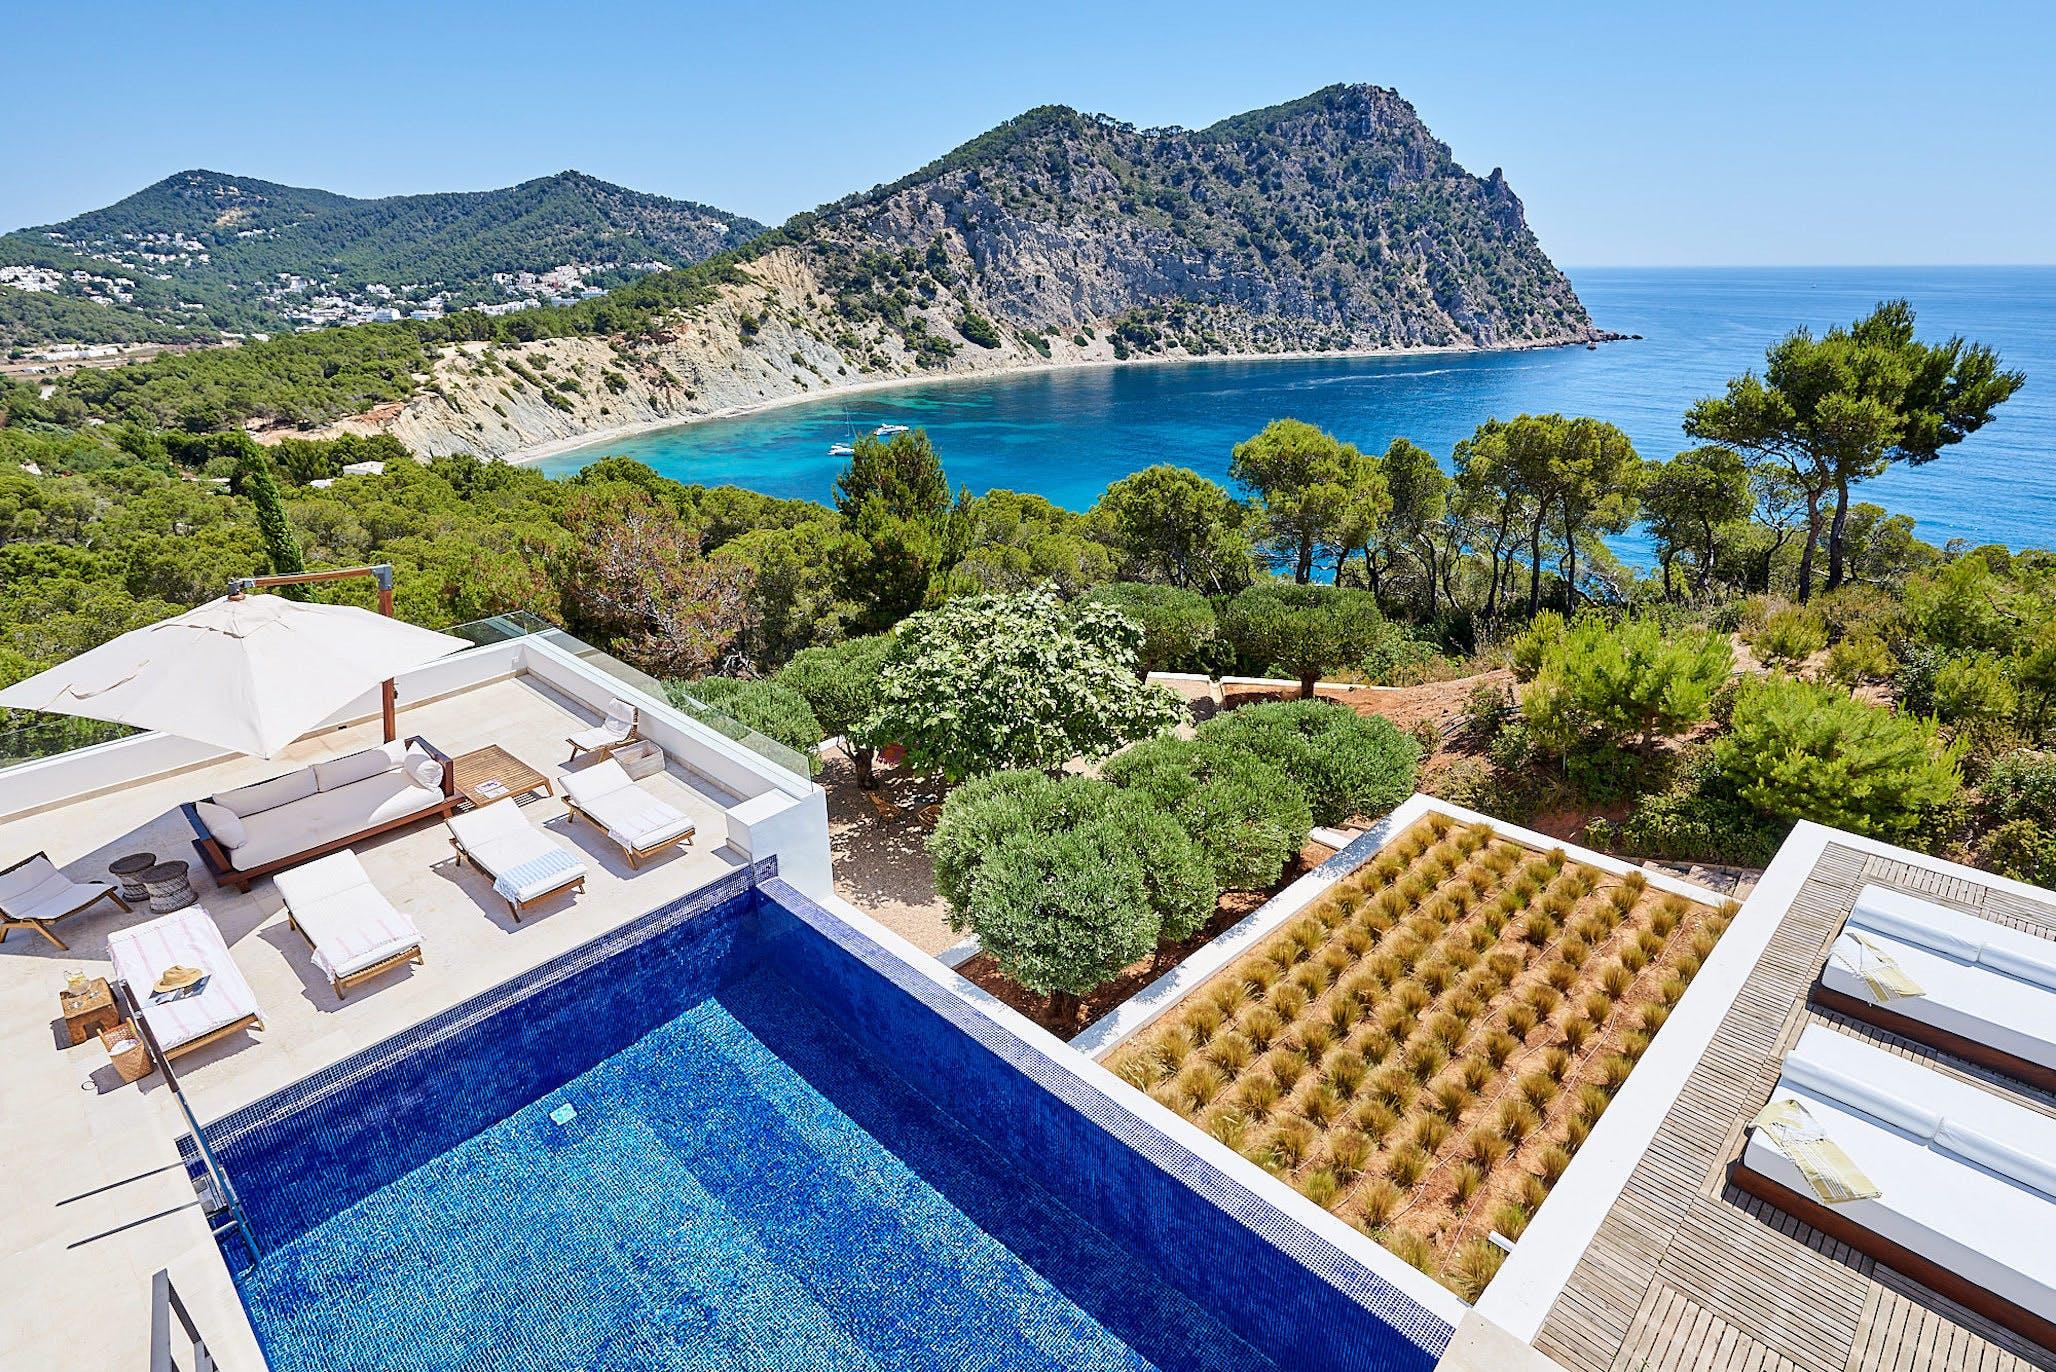 You are currently viewing Serena Vista – ‘Magnificent villa with unrivalled and breath-taking views over Sol den Serra.’